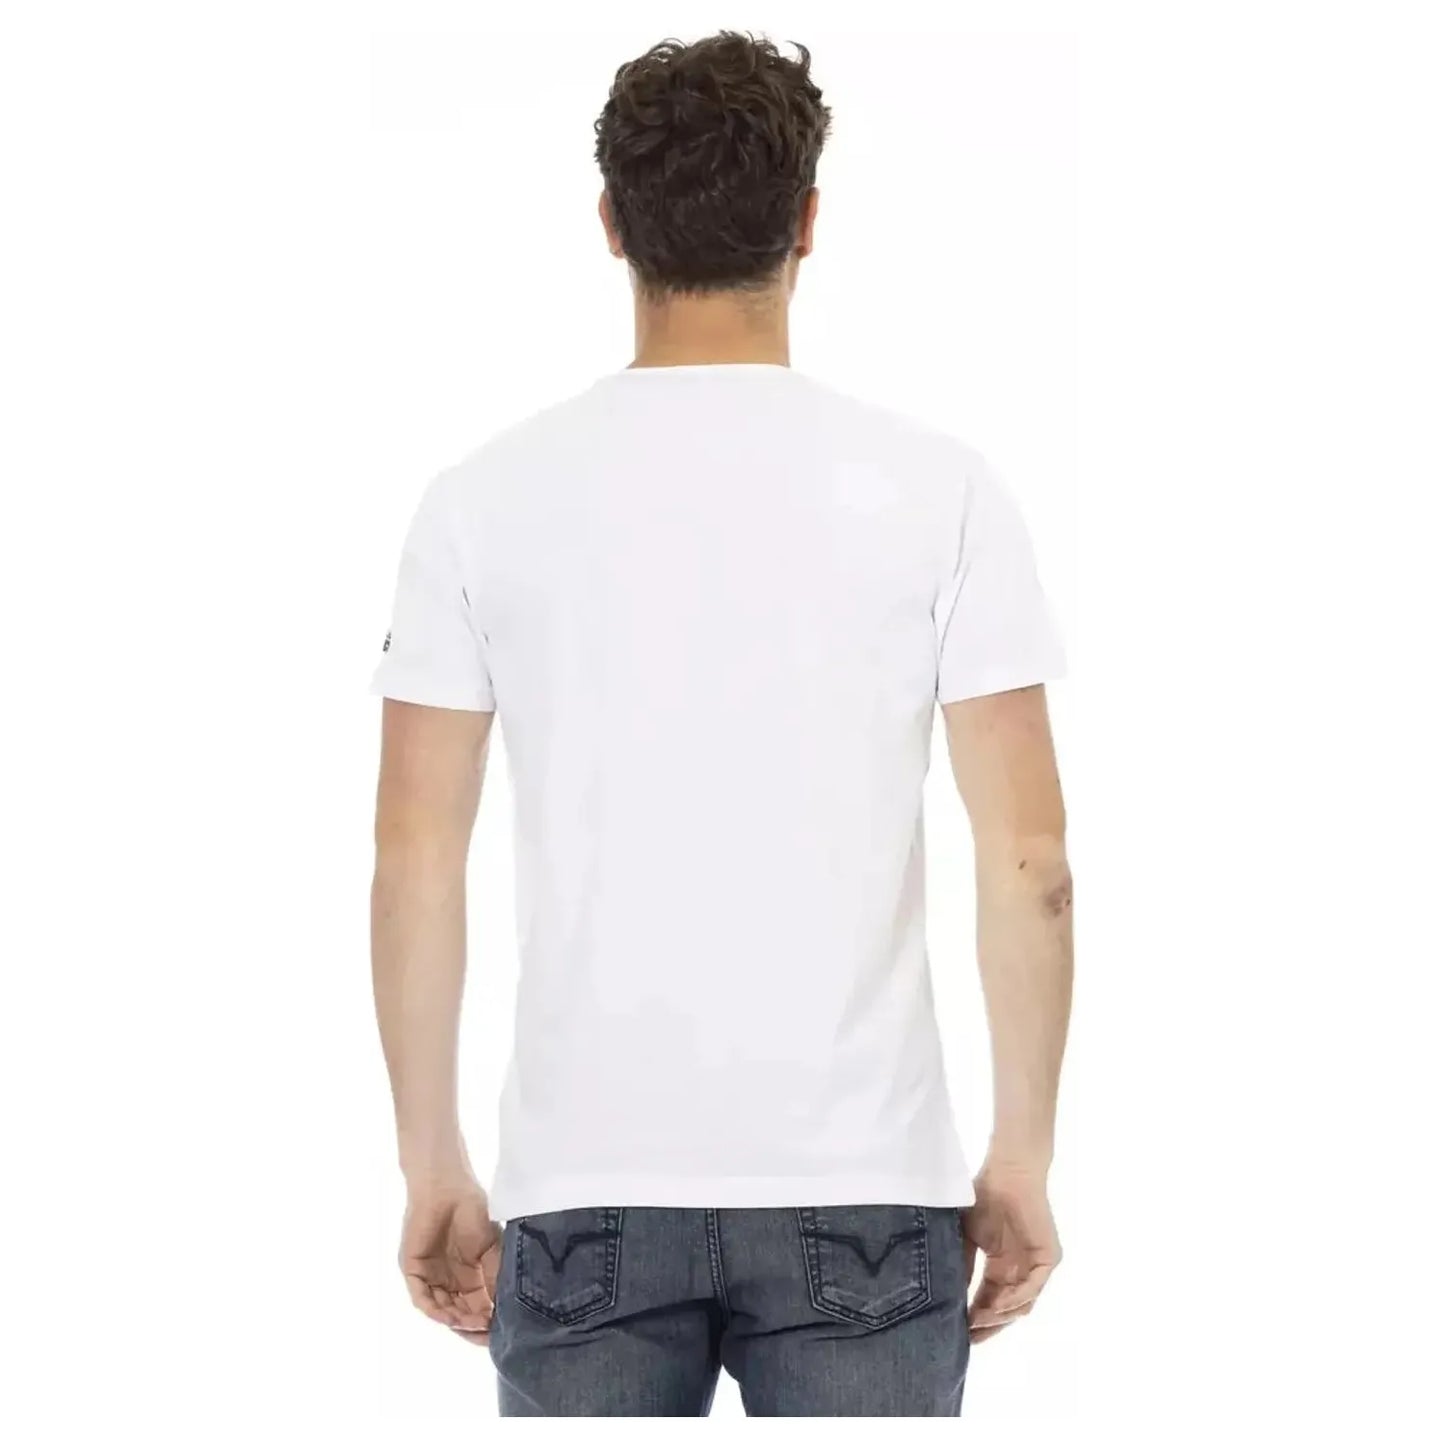 Trussardi Action Elevated Casual White Tee with Graphic Print white-cotton-t-shirt-114